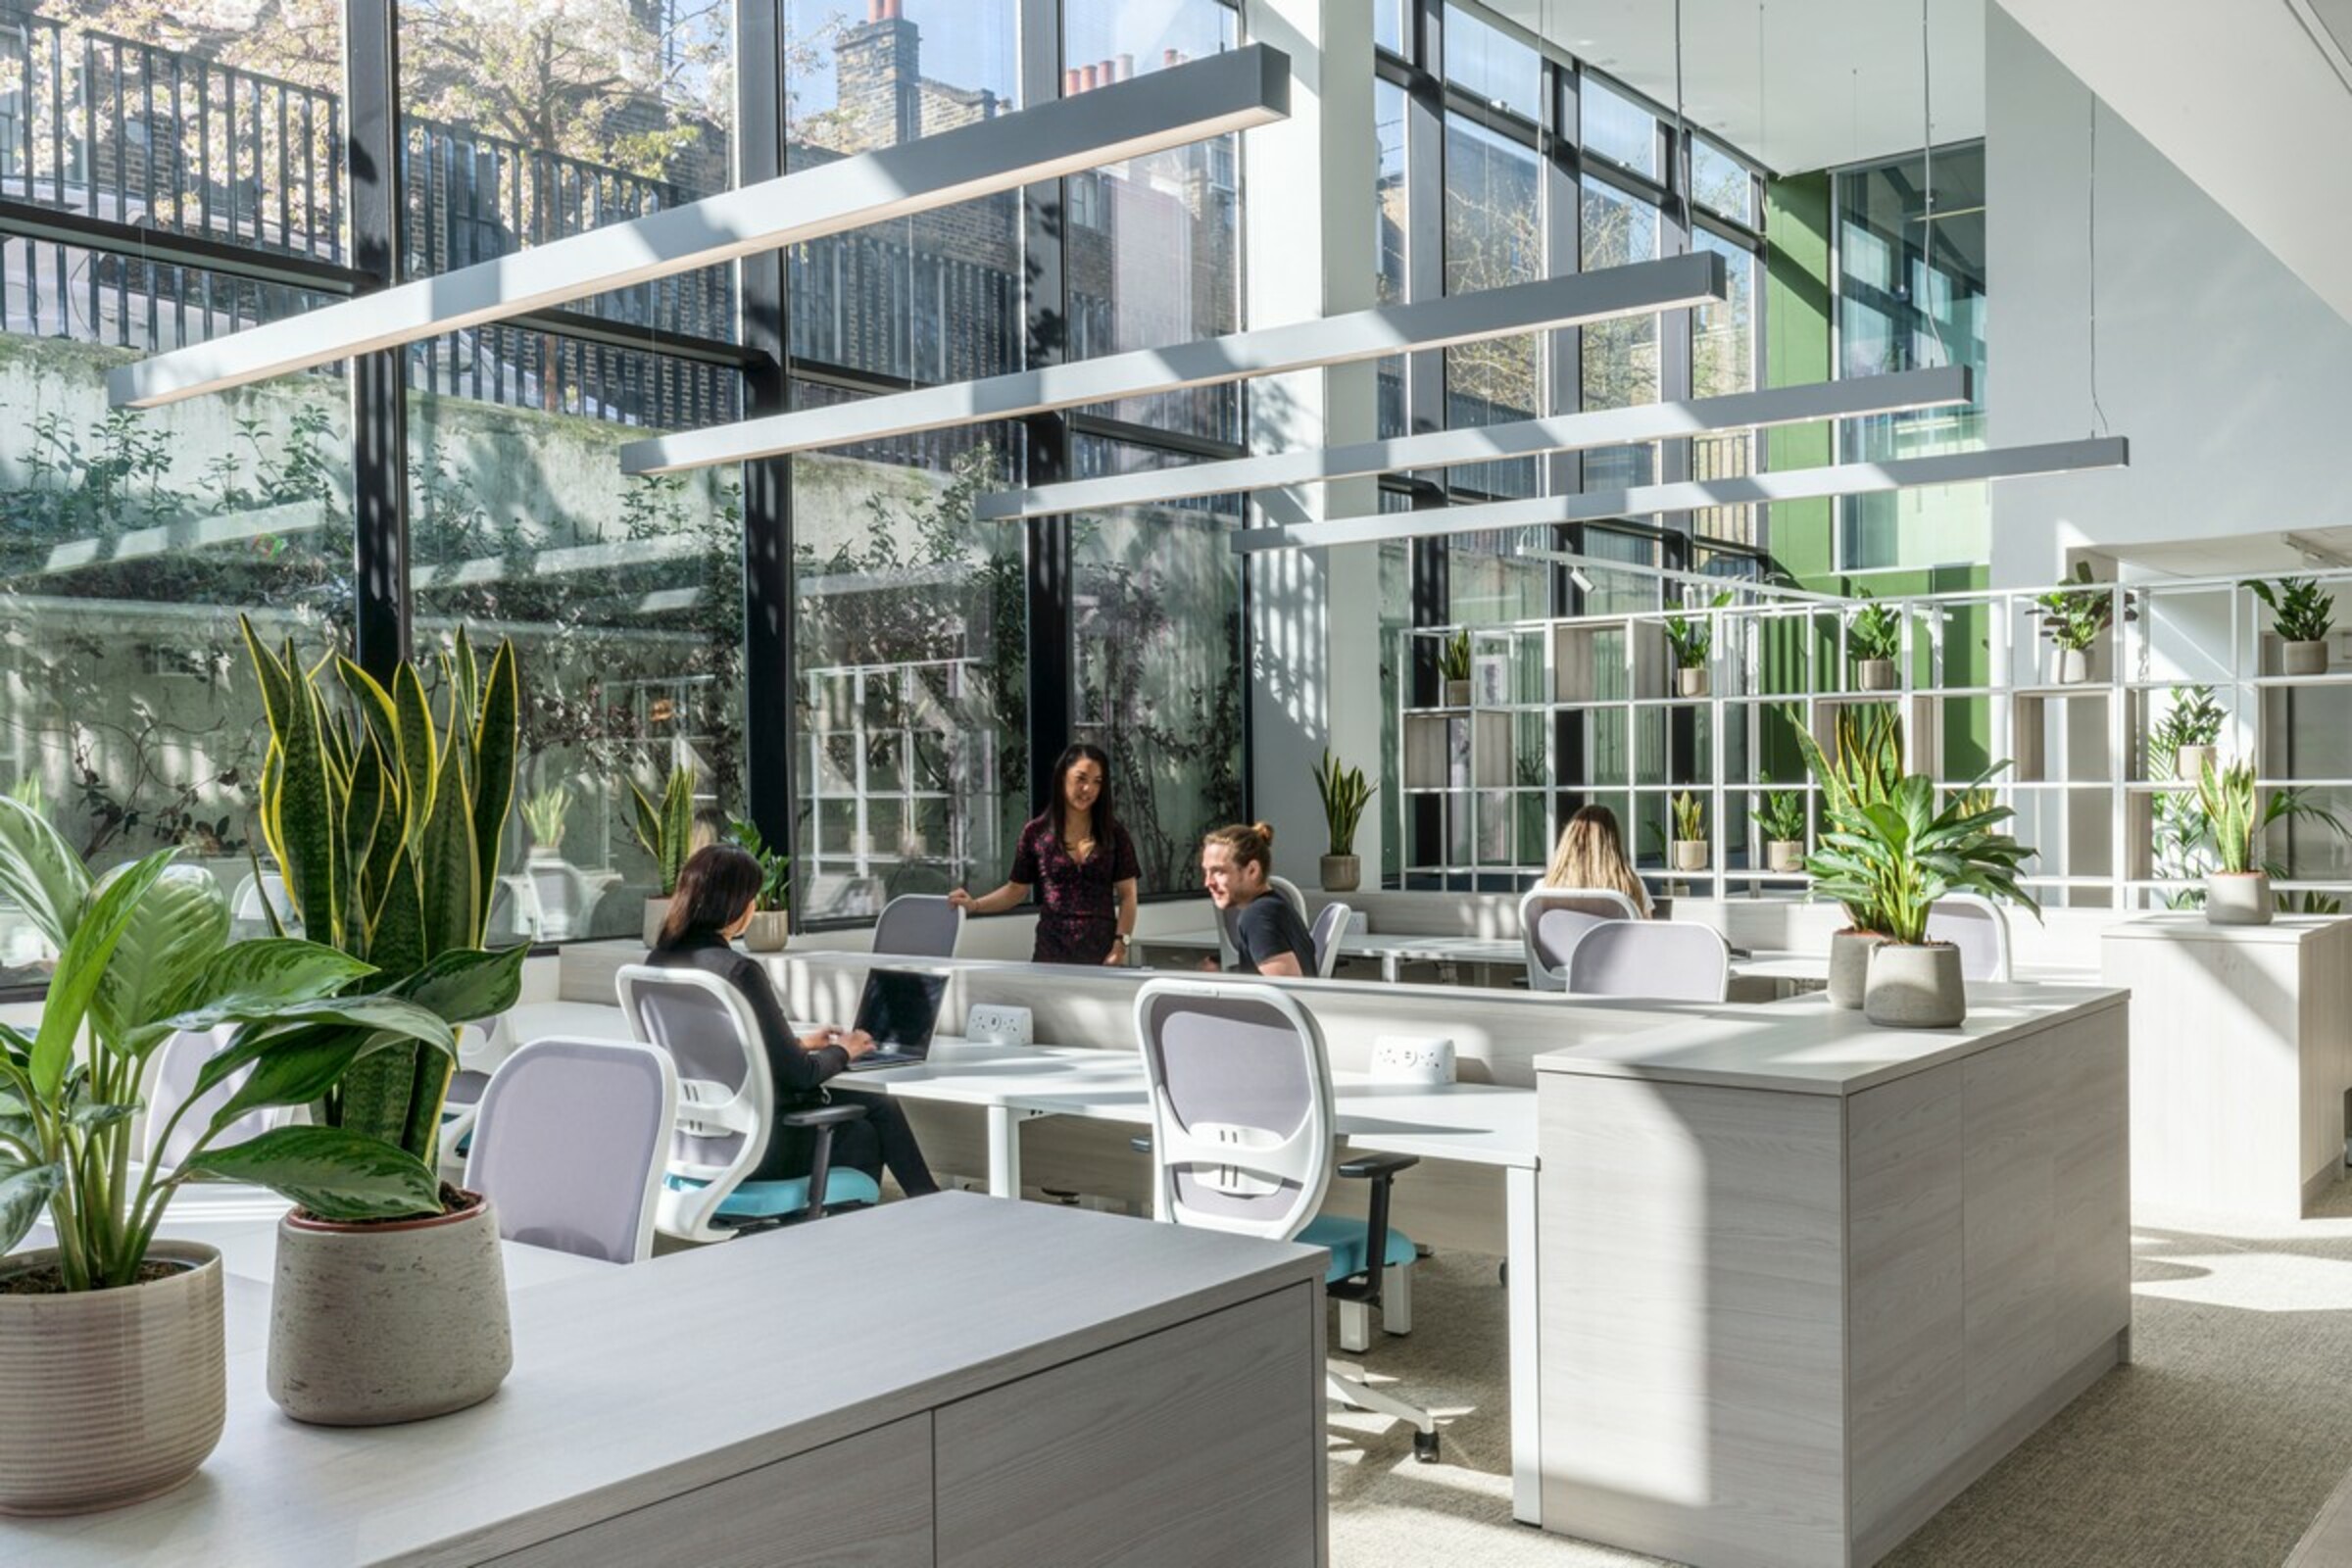 Coworking space at Queen Mary University Enterprise Zone, Whitechapel